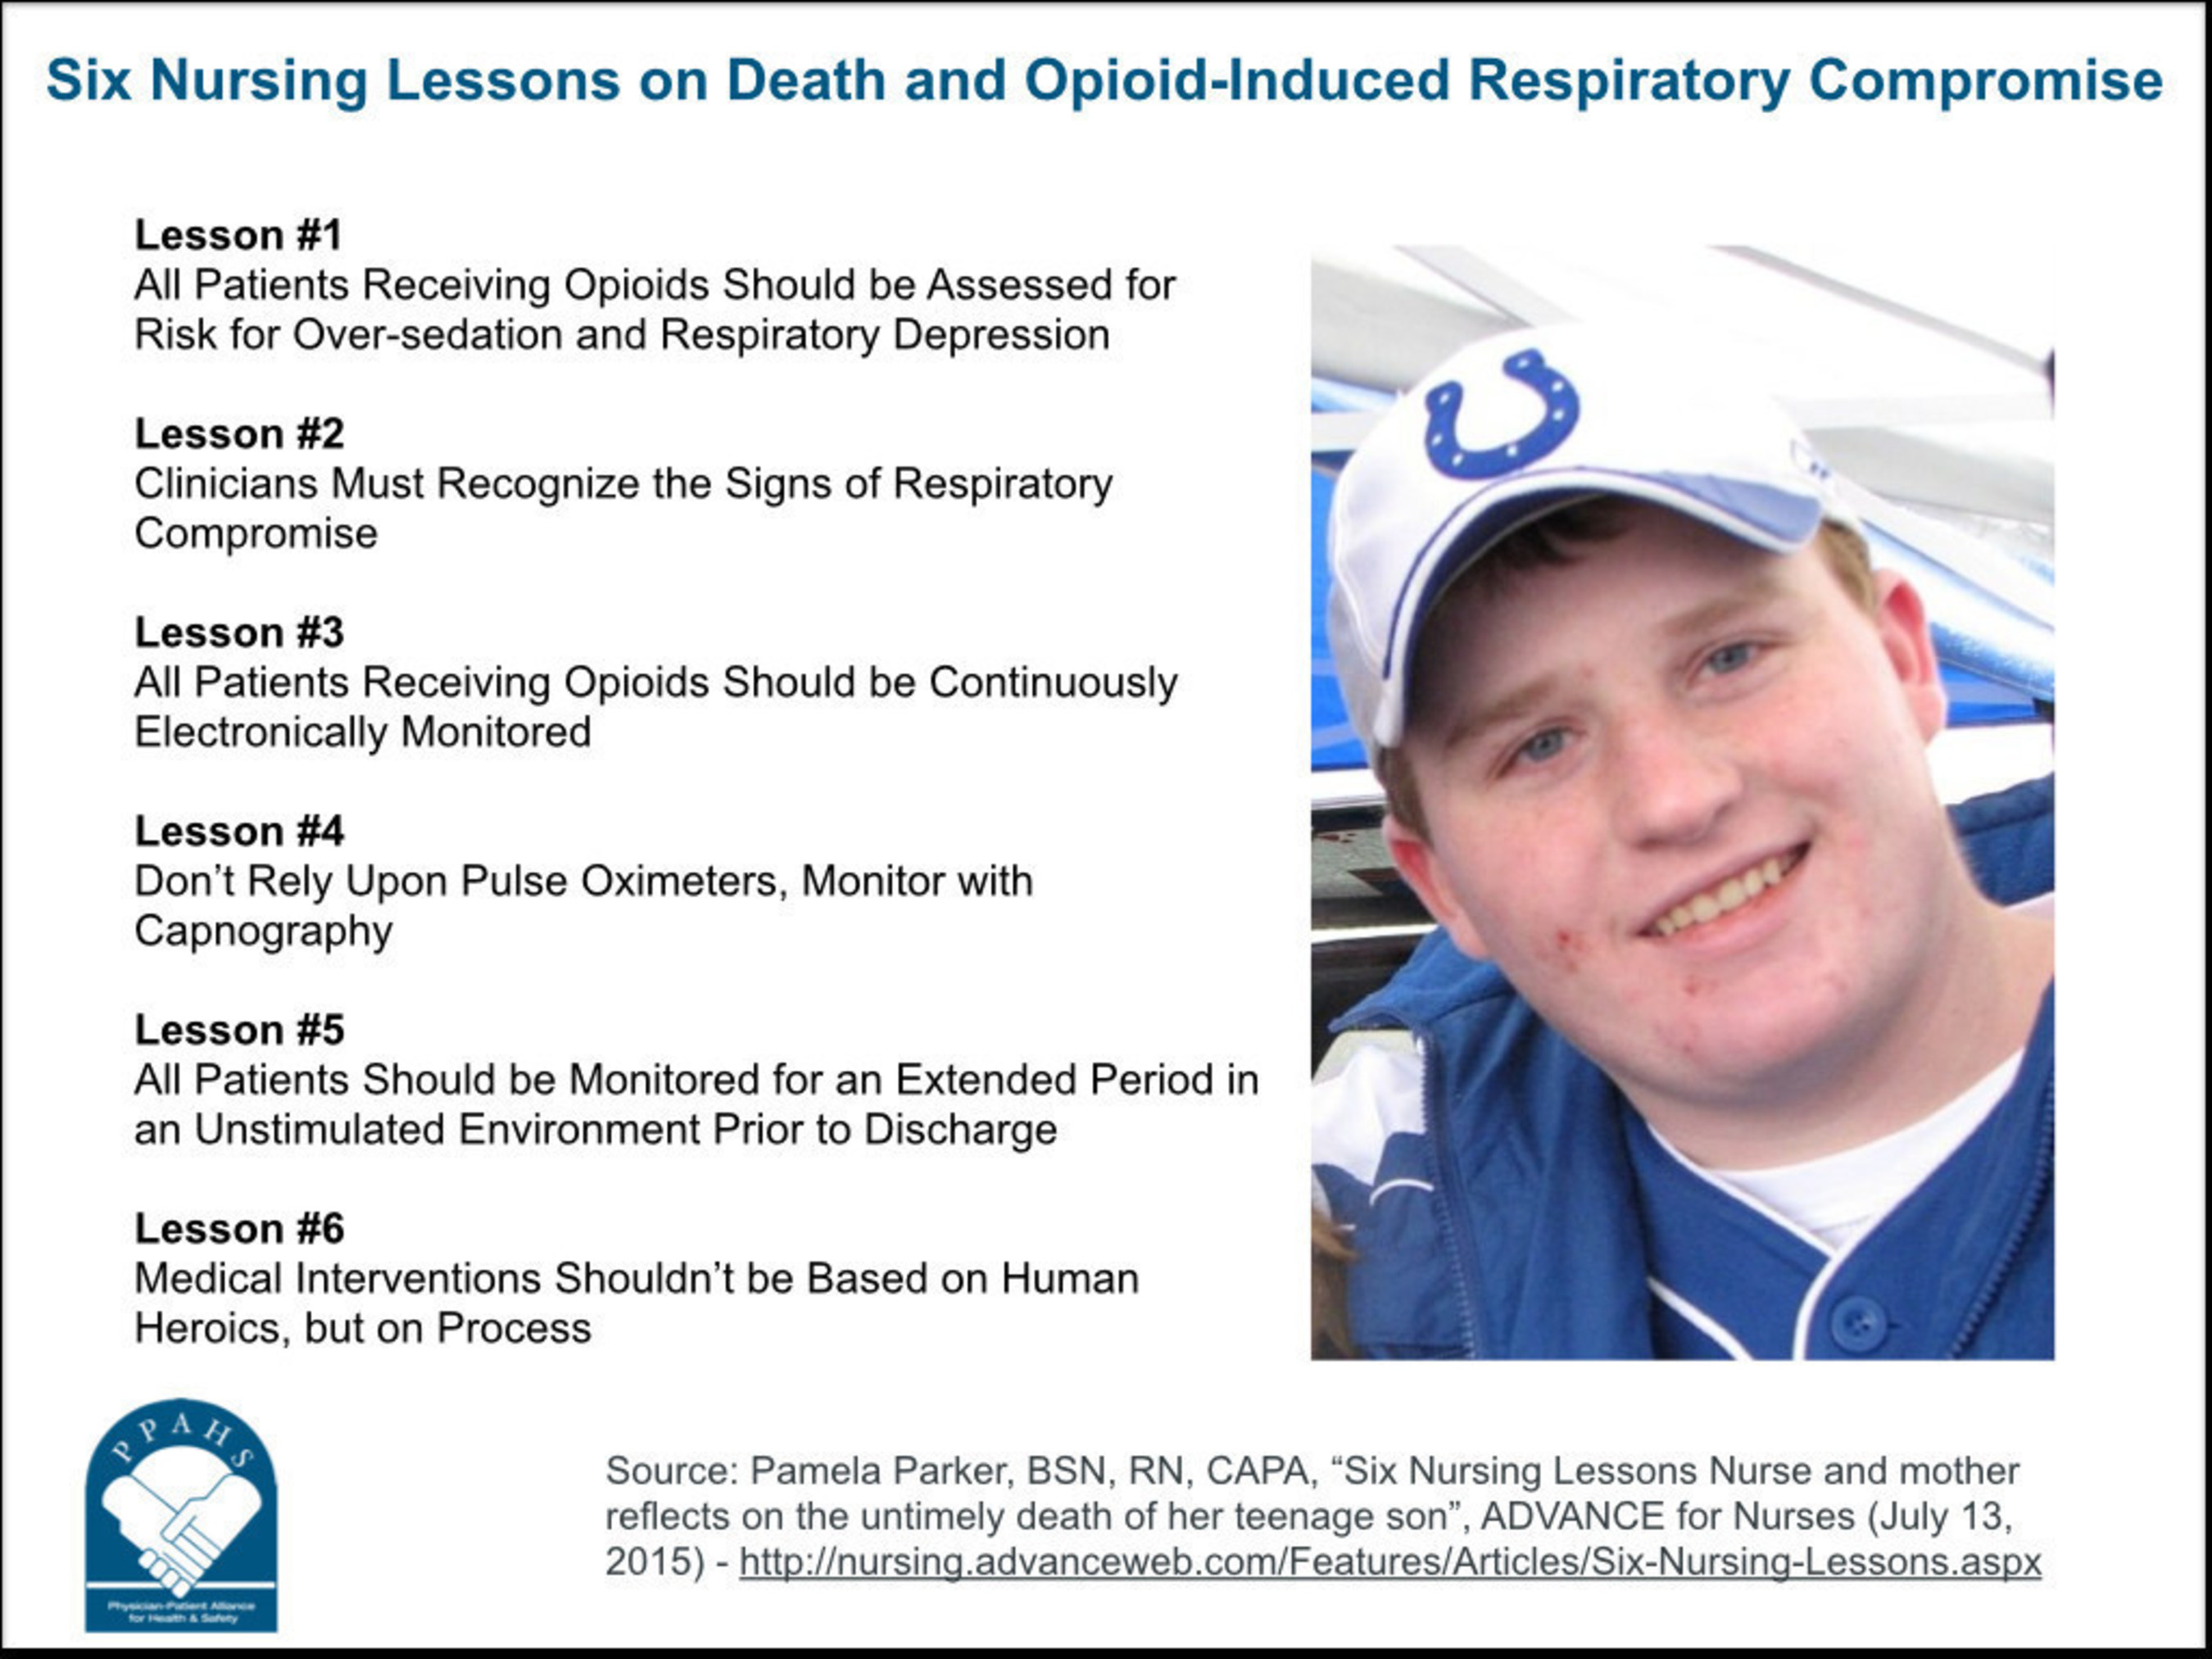 Six lessons on death and opioid-induced respiratory compromise in honor of the death anniversary of 17-year old Logan